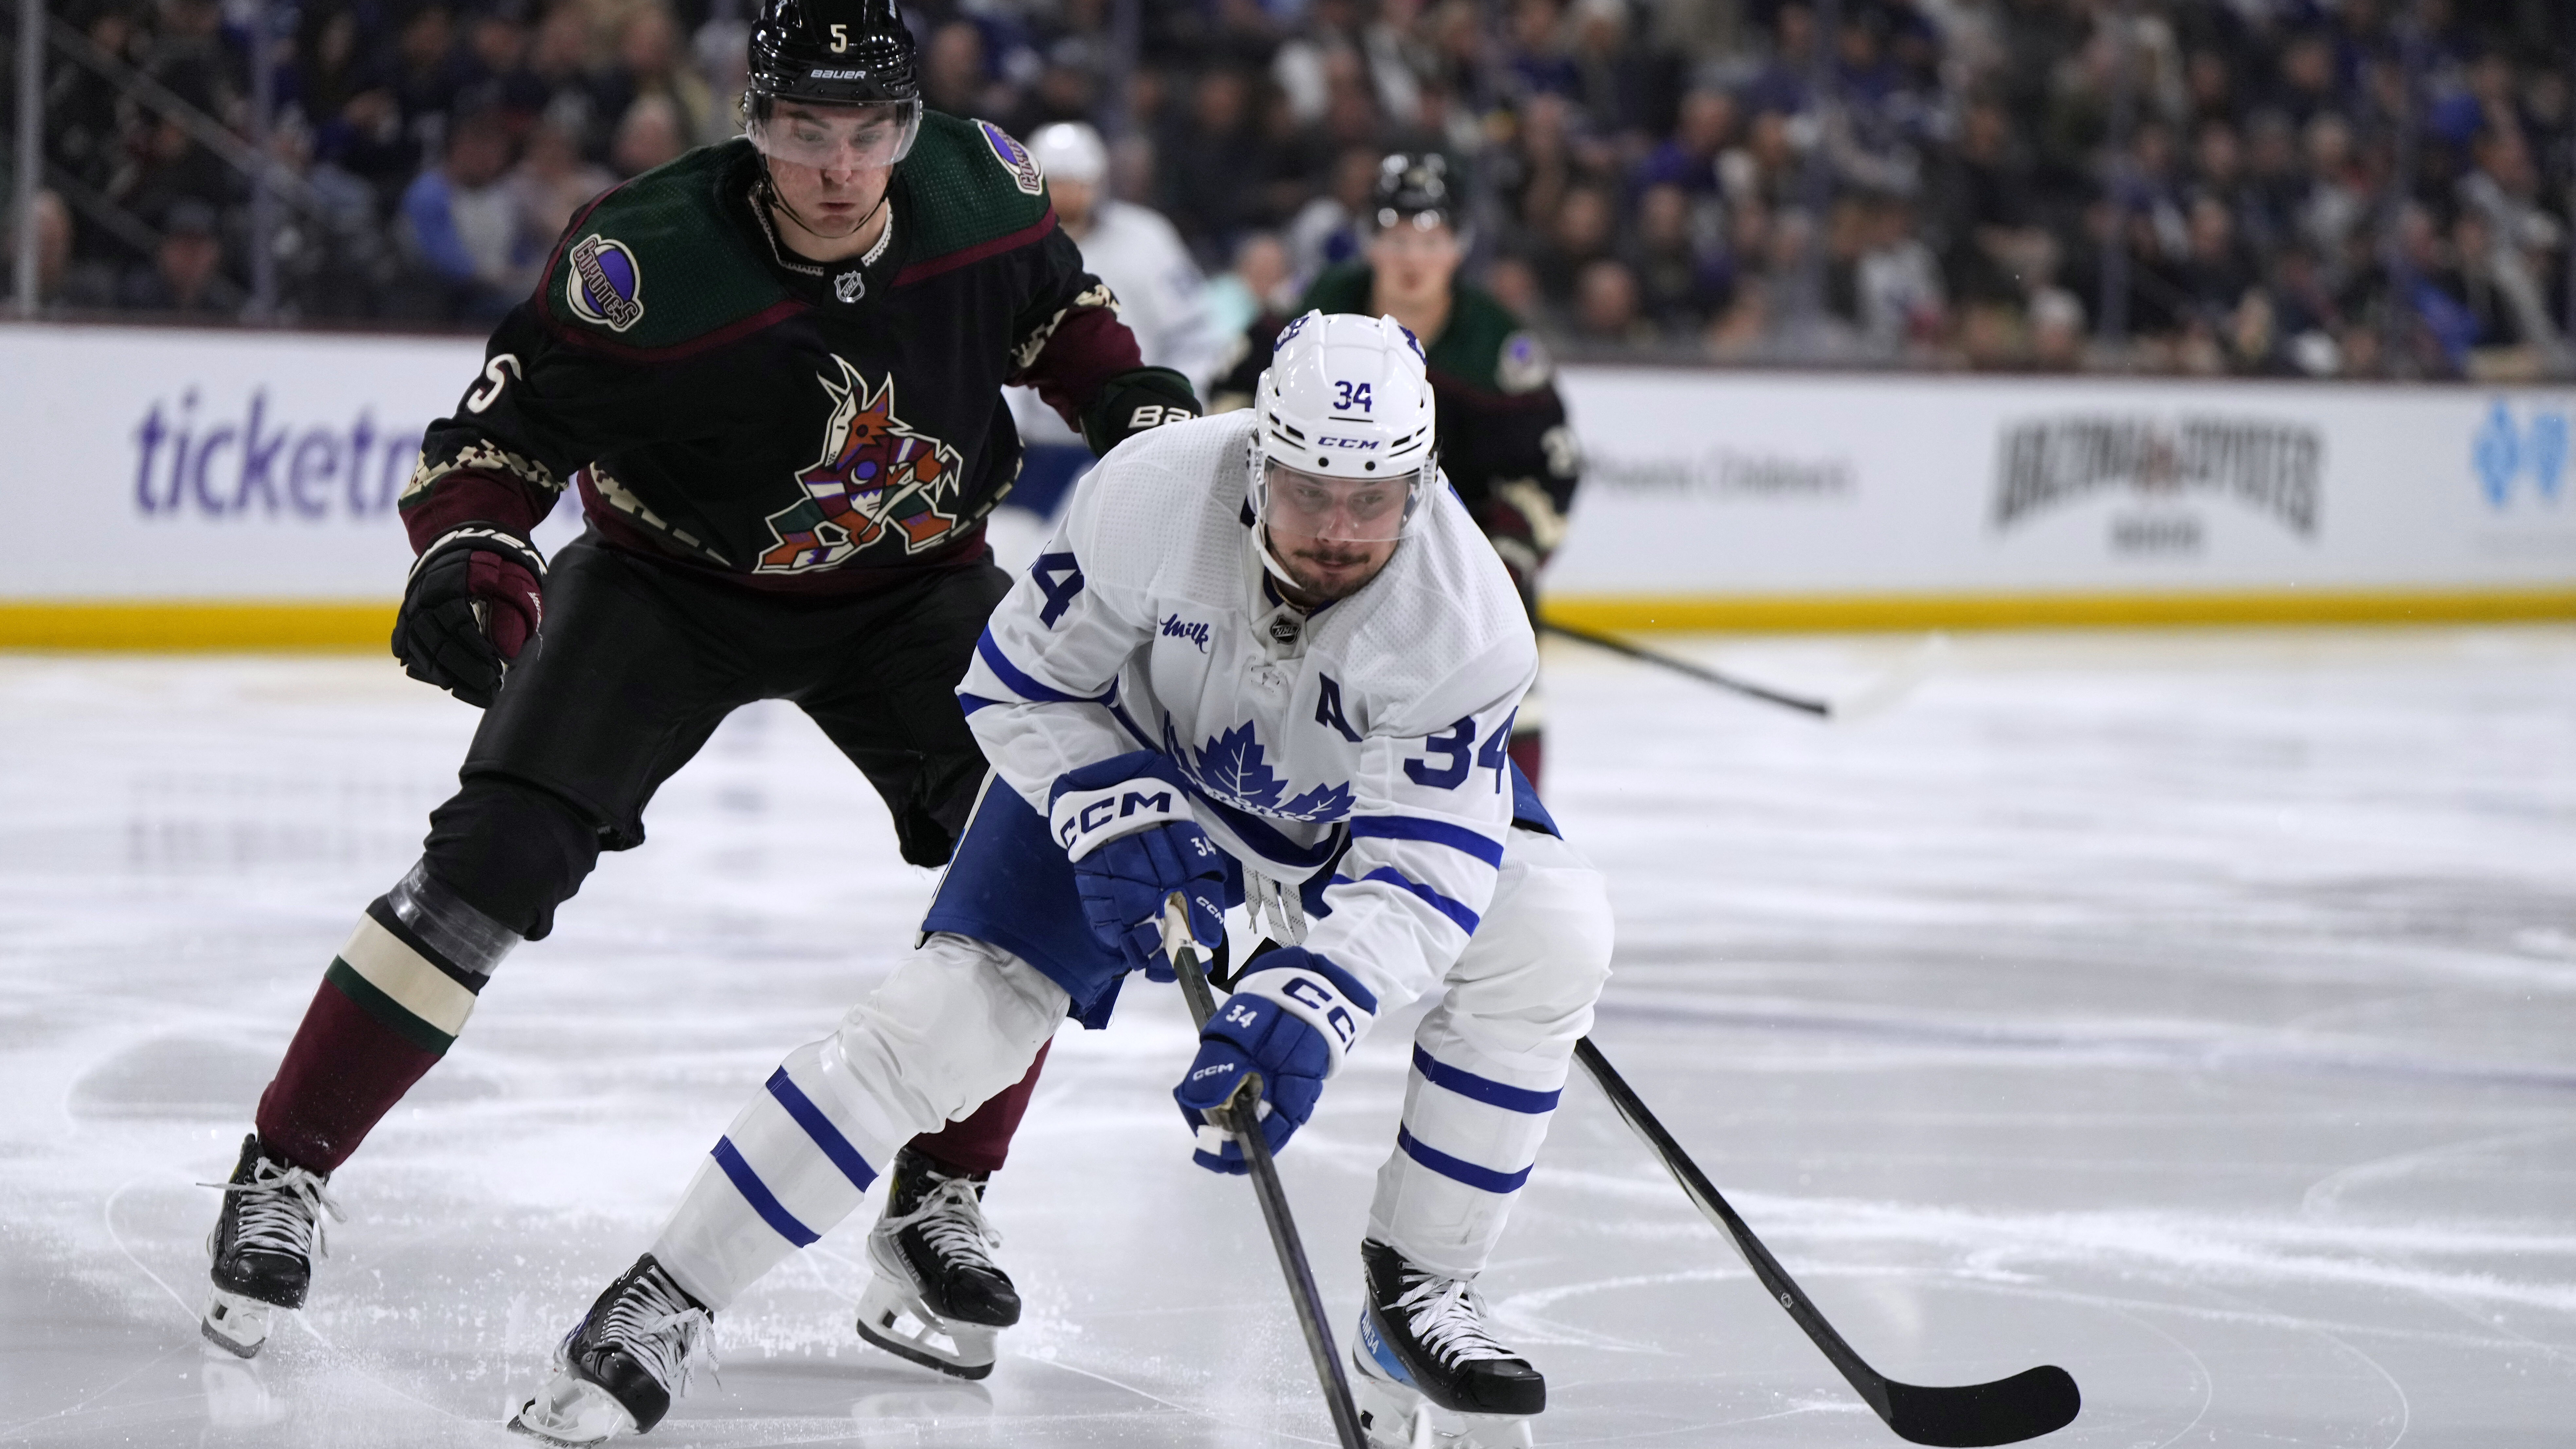 Toronto Maple Leafs center Auston Matthews (34) carries the puck in front of Arizona Coyotes defens...